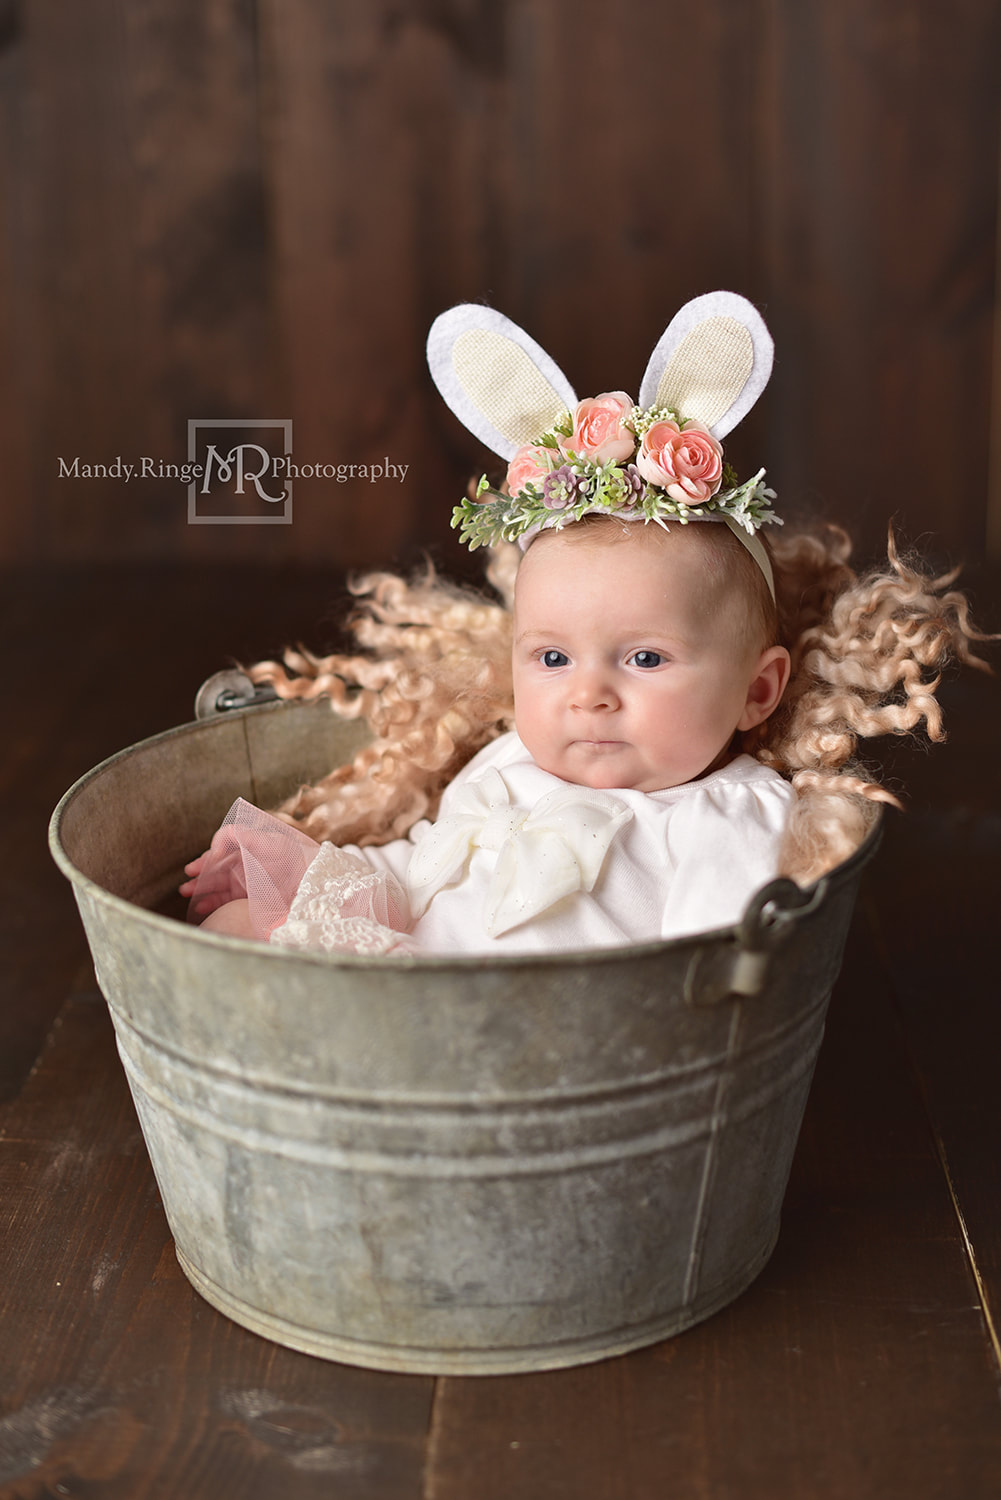 3 month old girl portraits // St. Charles, IL studio // by Mandy Ringe Photography